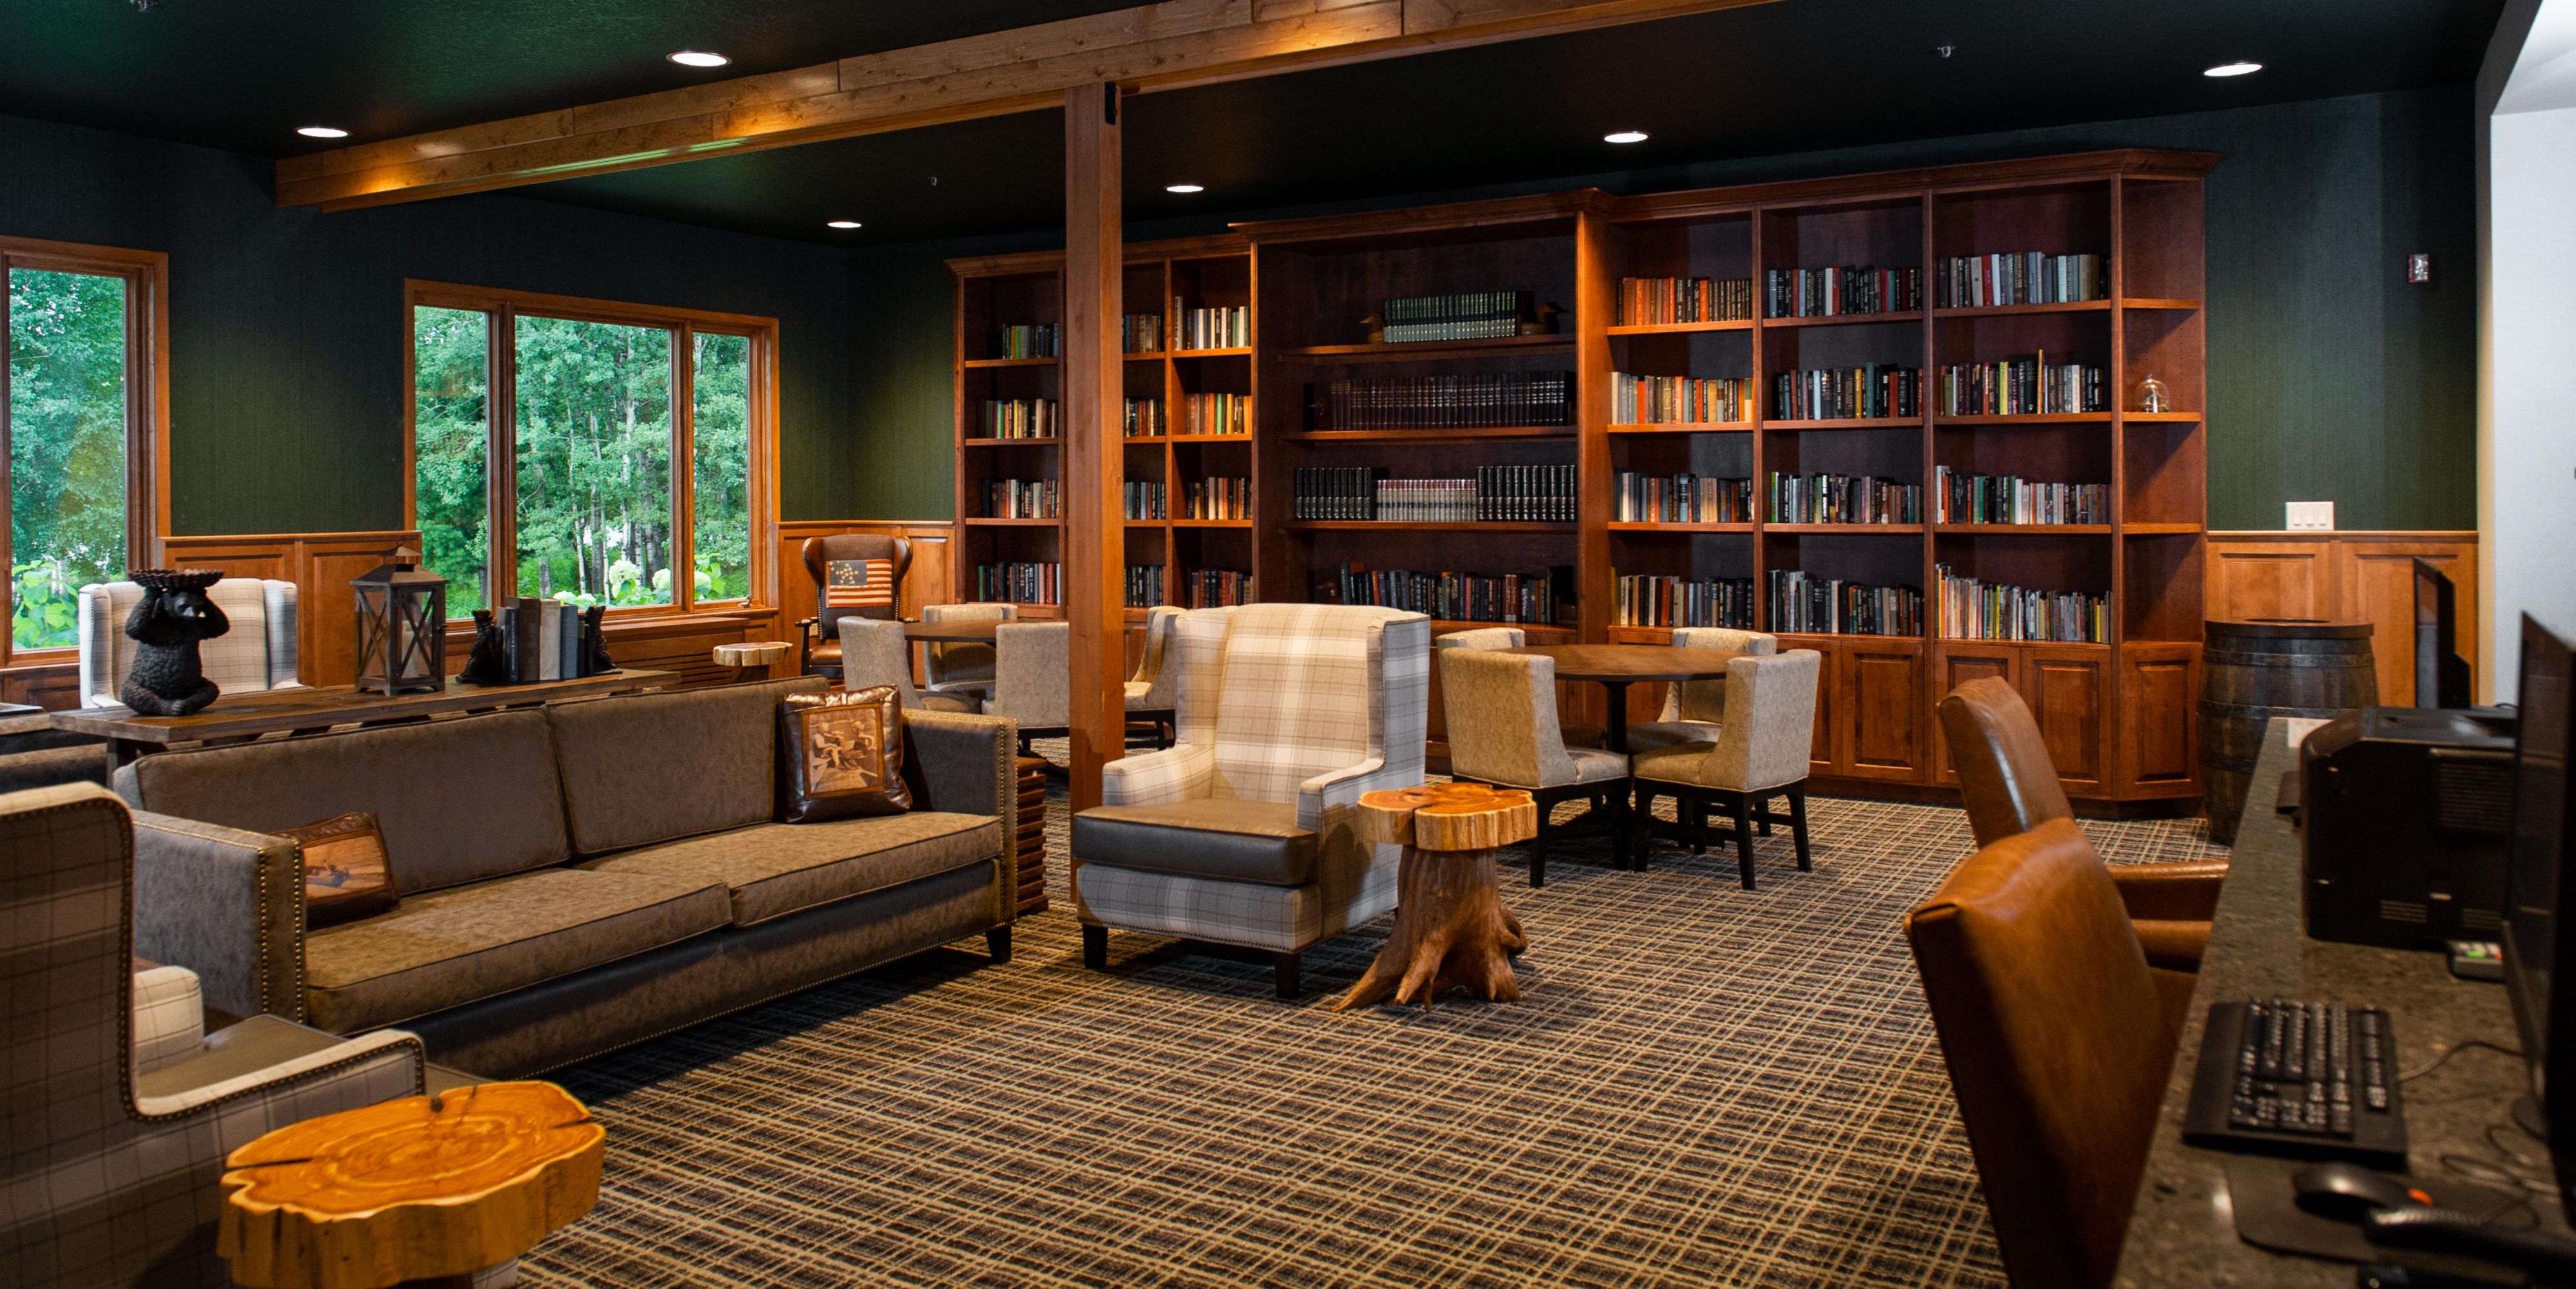 Bring a book, or find one at our hotel's relaxing Library lounge, located just off the lobby.  Our Library Lounge isn't just for reading, you can also play chess, or talk to the front desk about other board games they have available.